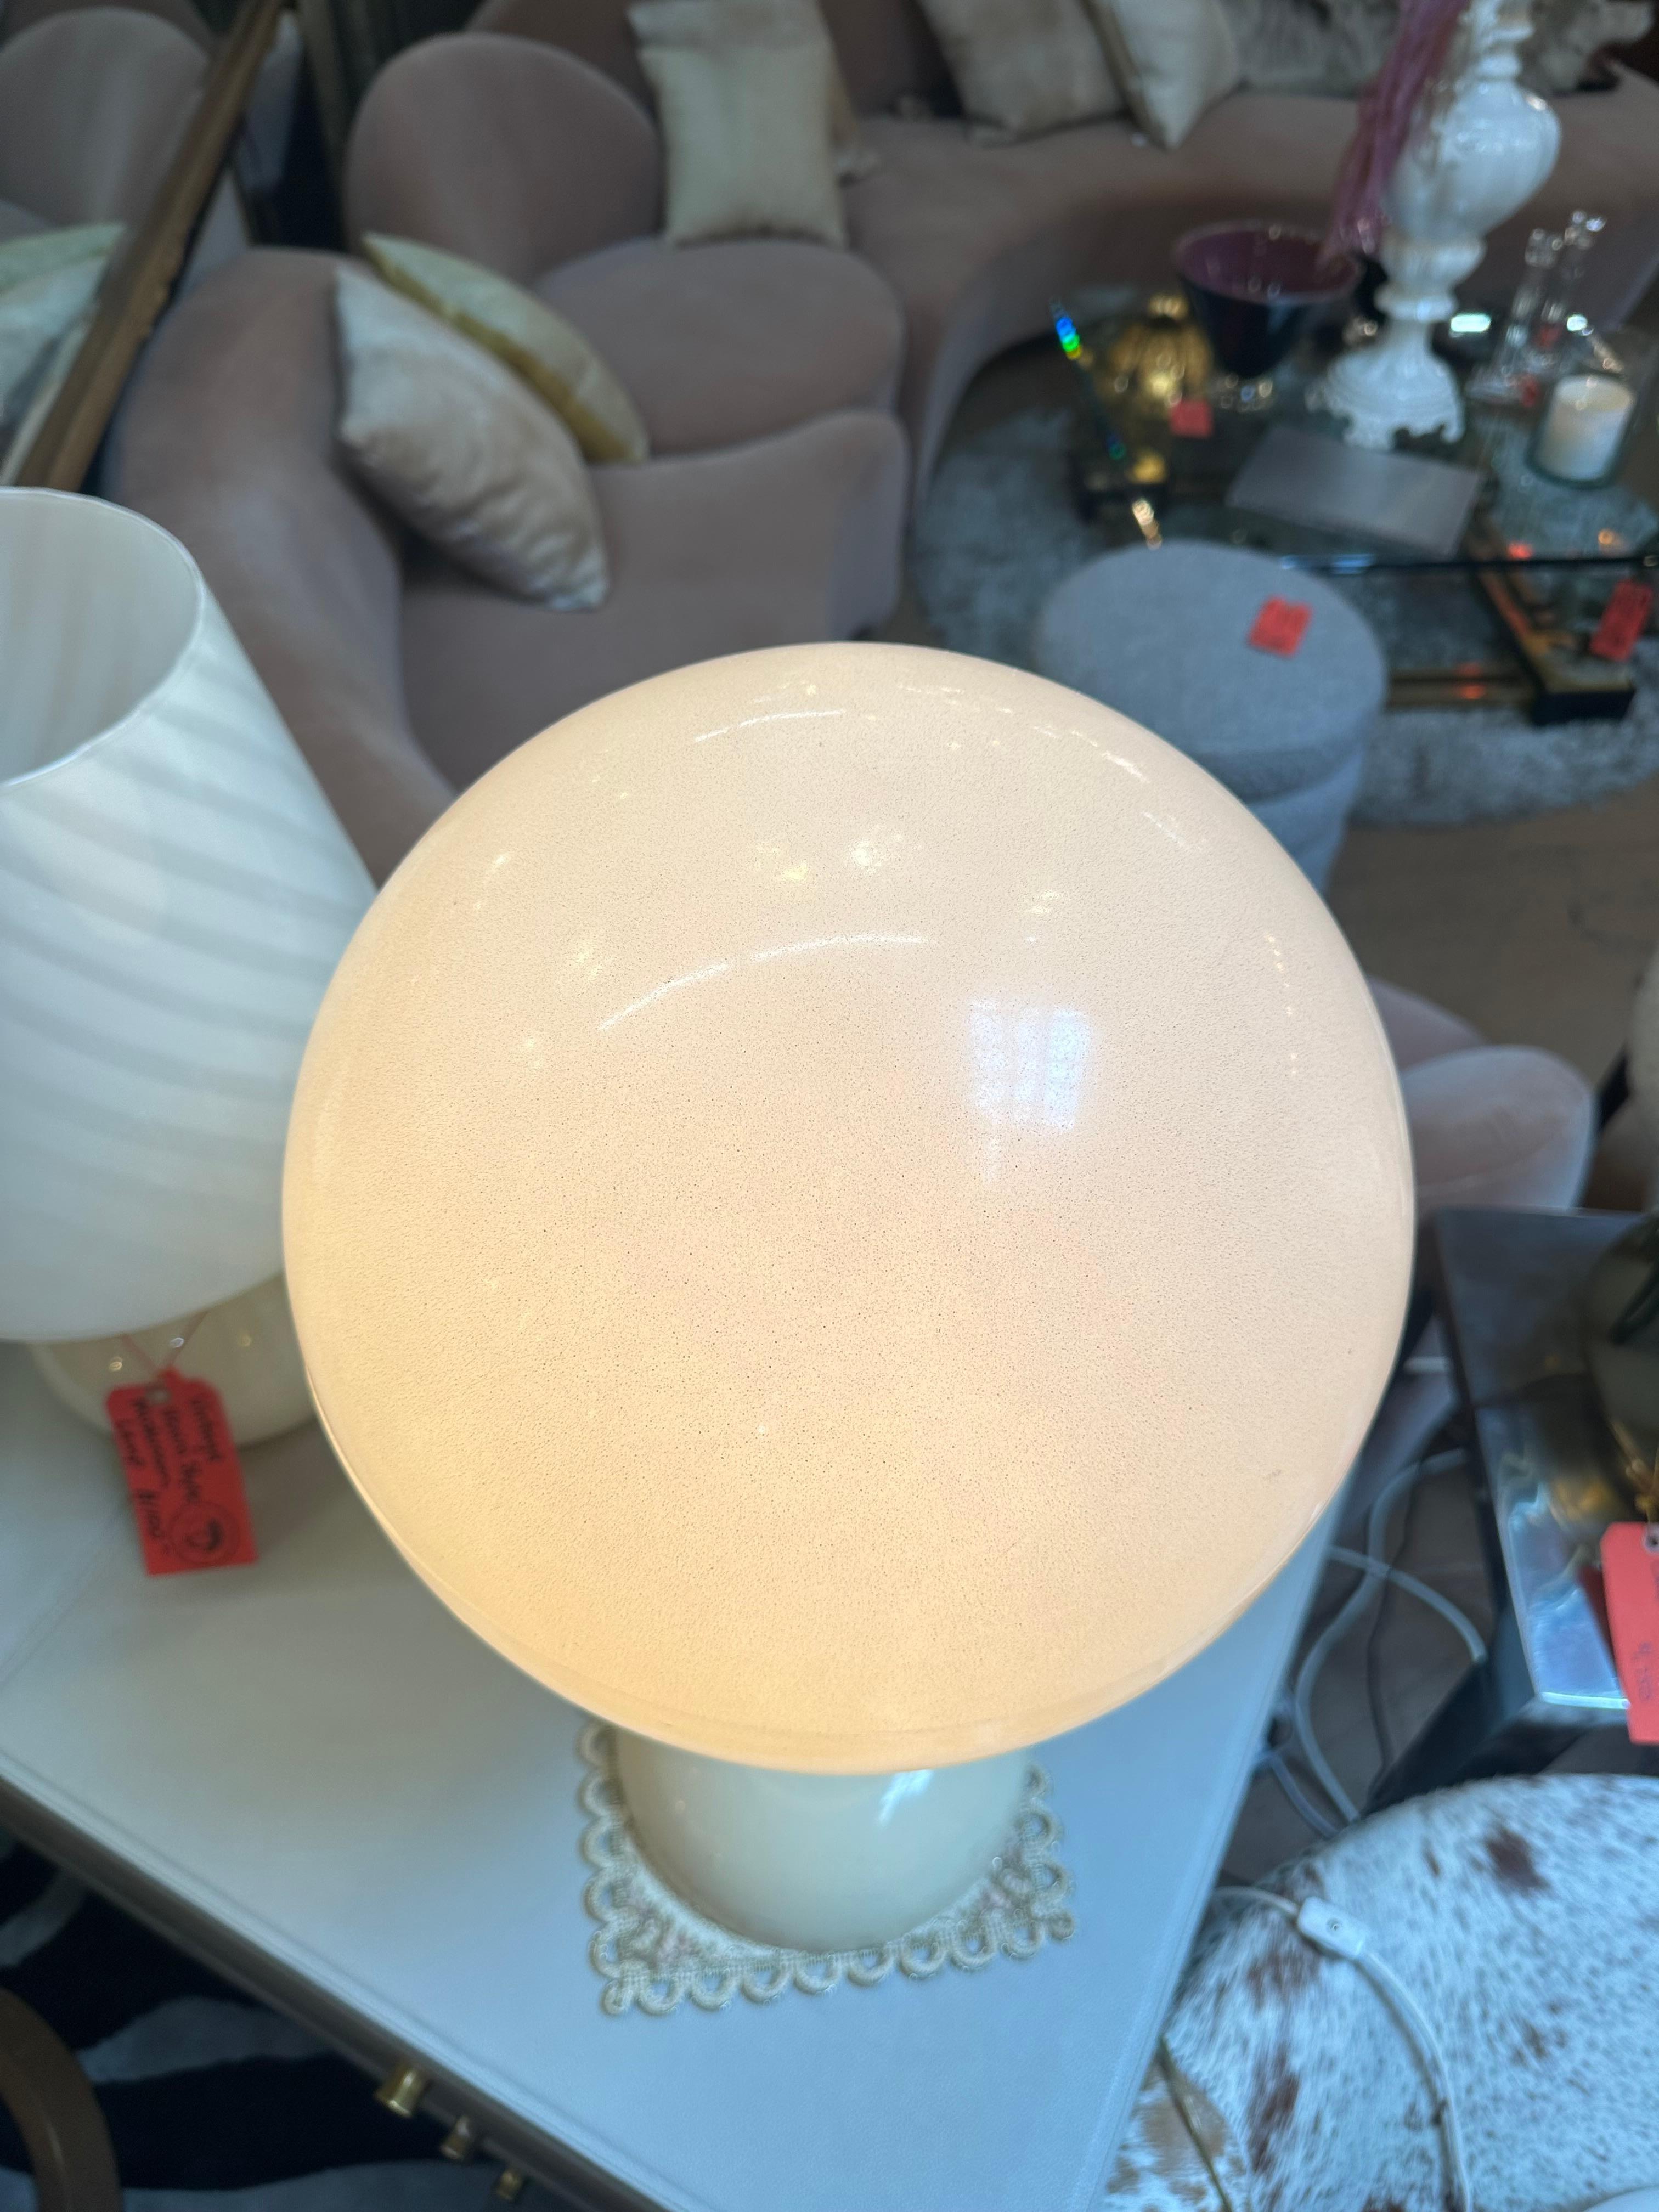 Vintage Mid Century Modern Olympia Lunar 1 Indoor/Outdoor Globe Lamp  In Good Condition For Sale In Chicago, IL